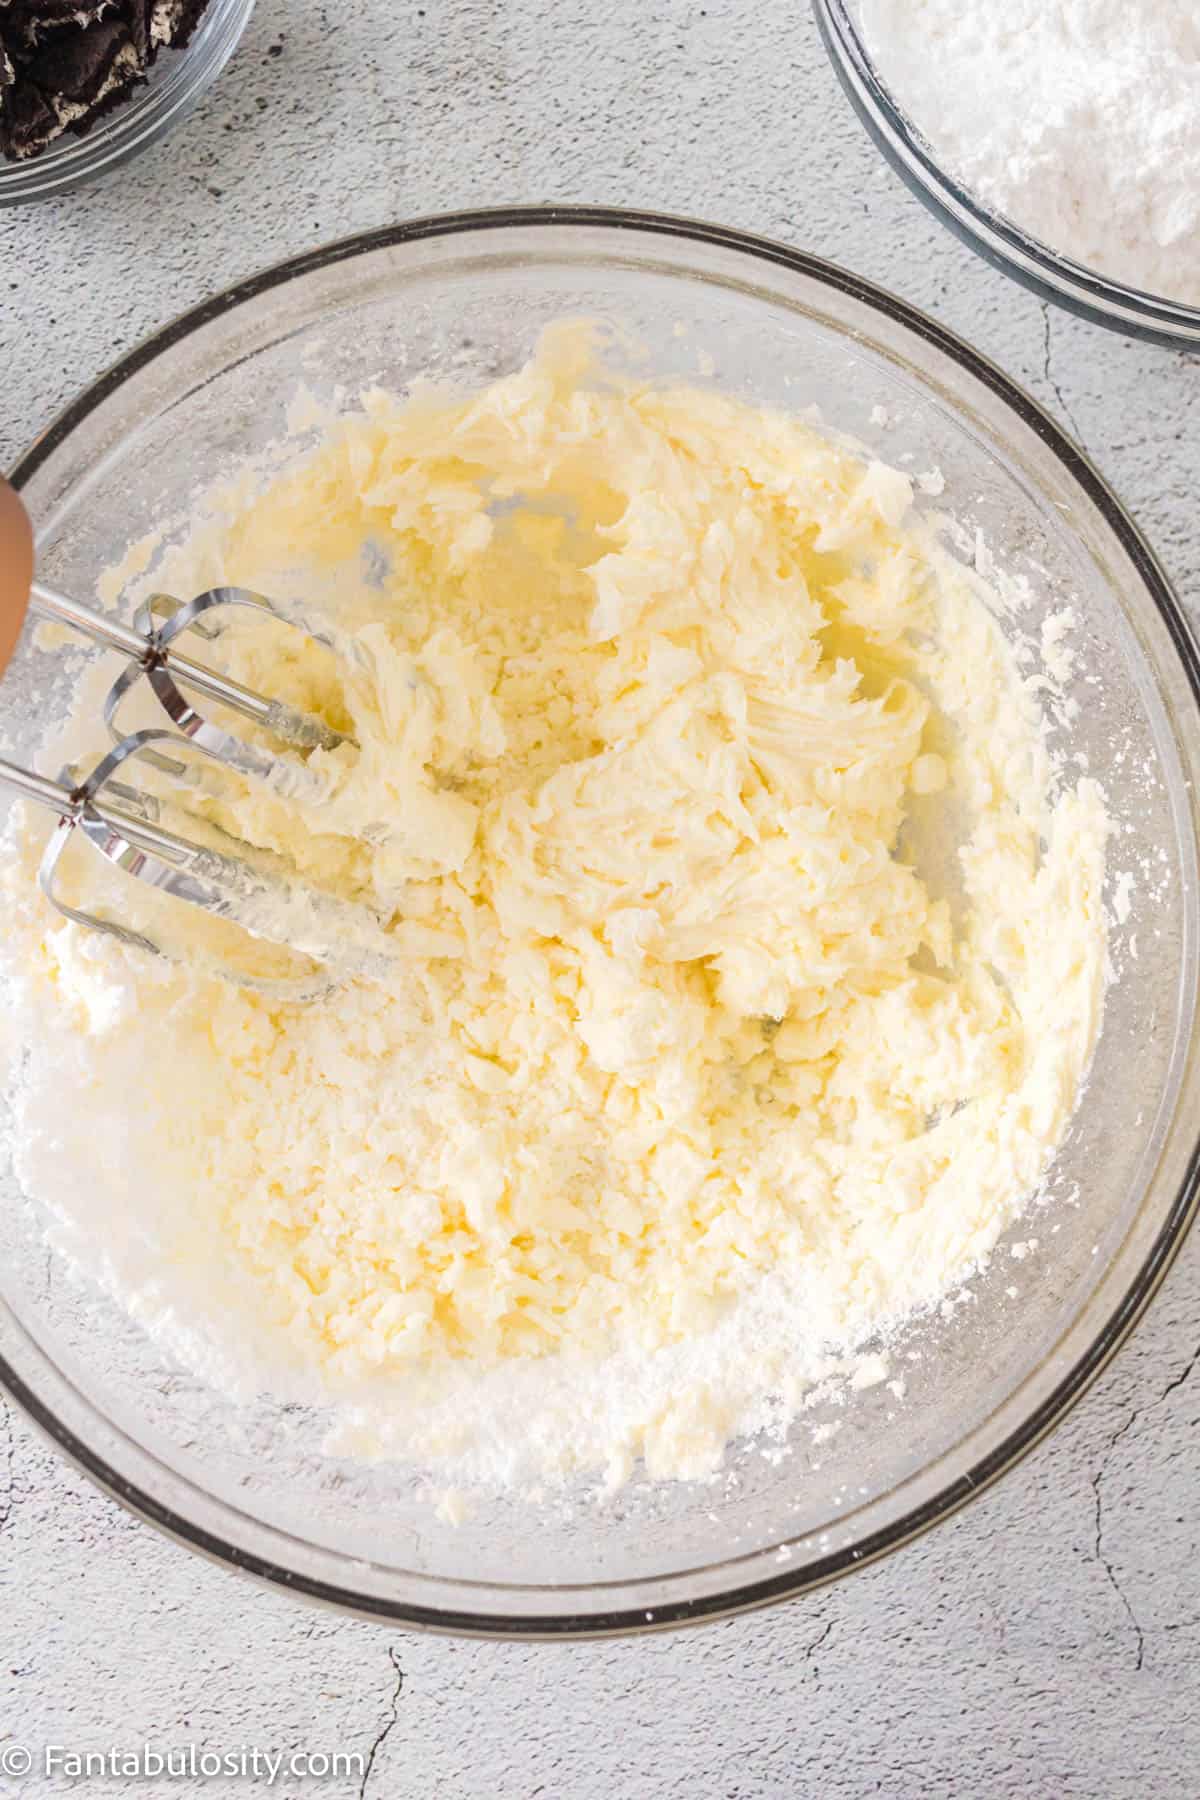 Cream the butter until all soft.